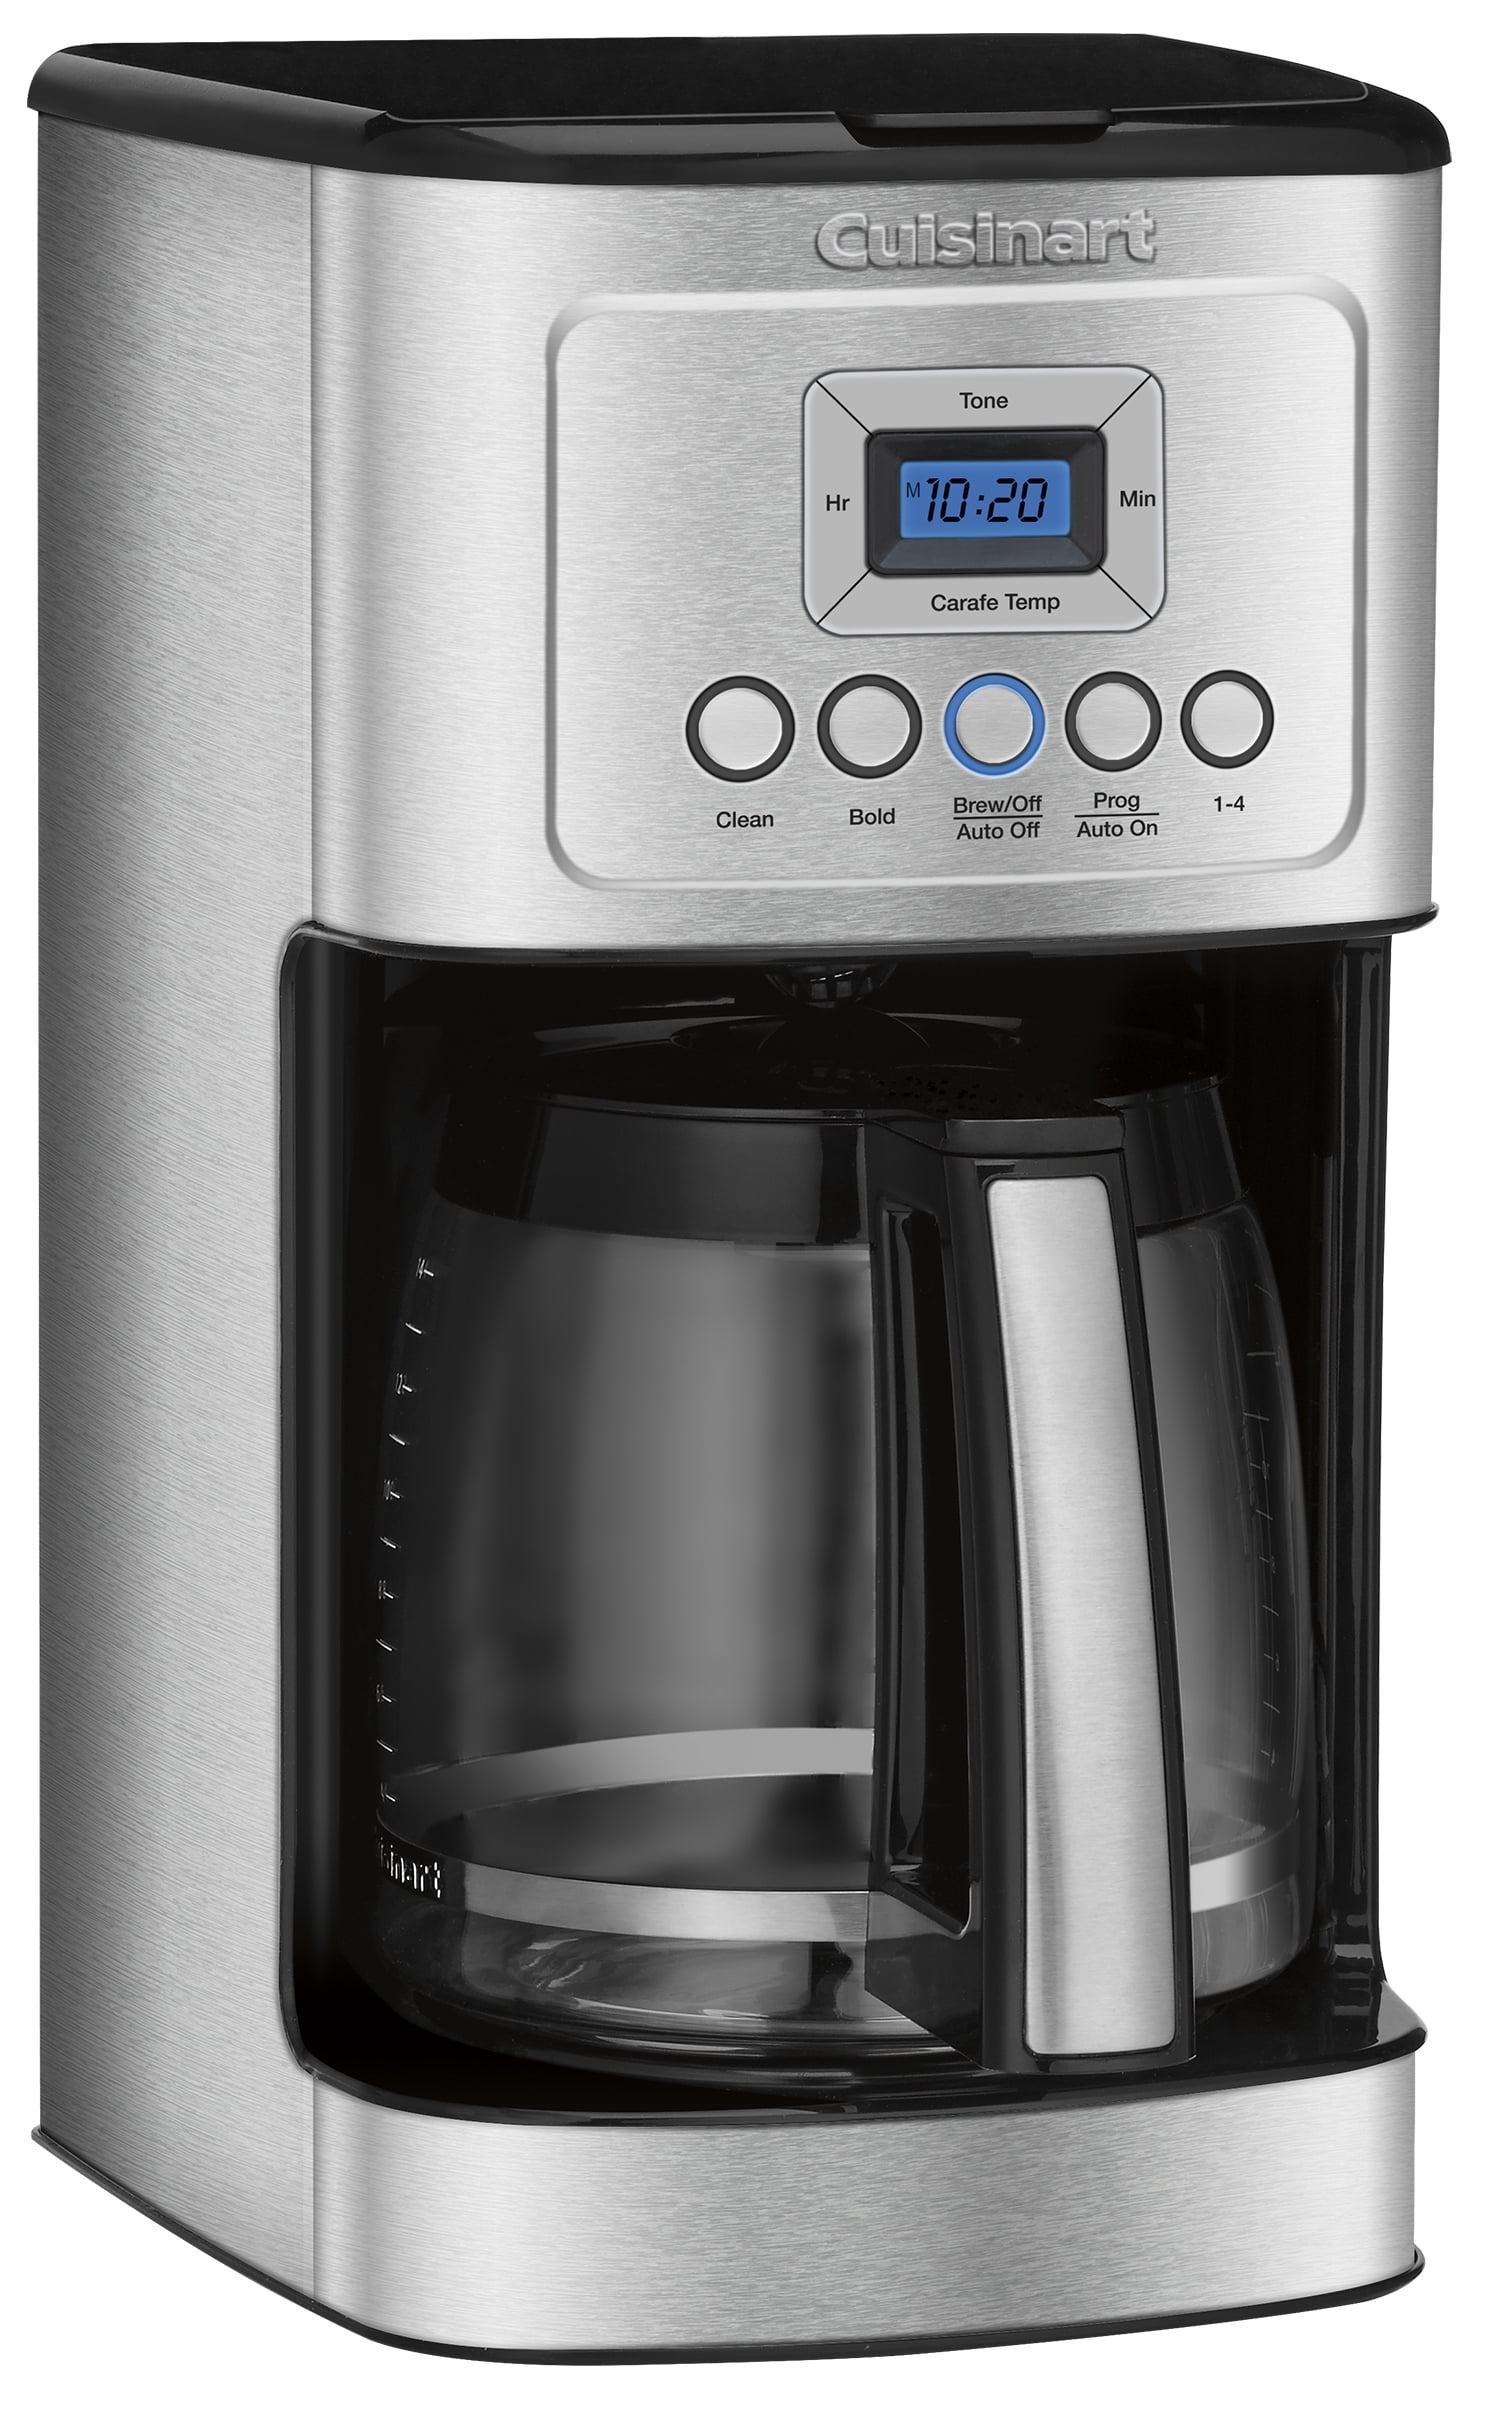 Toastmaster 5 Cup Coffee Maker Want To Know More Visit The Site Now Coffee Maker Coffee Maker Coffee Maker Reviews Coffee Machine Best